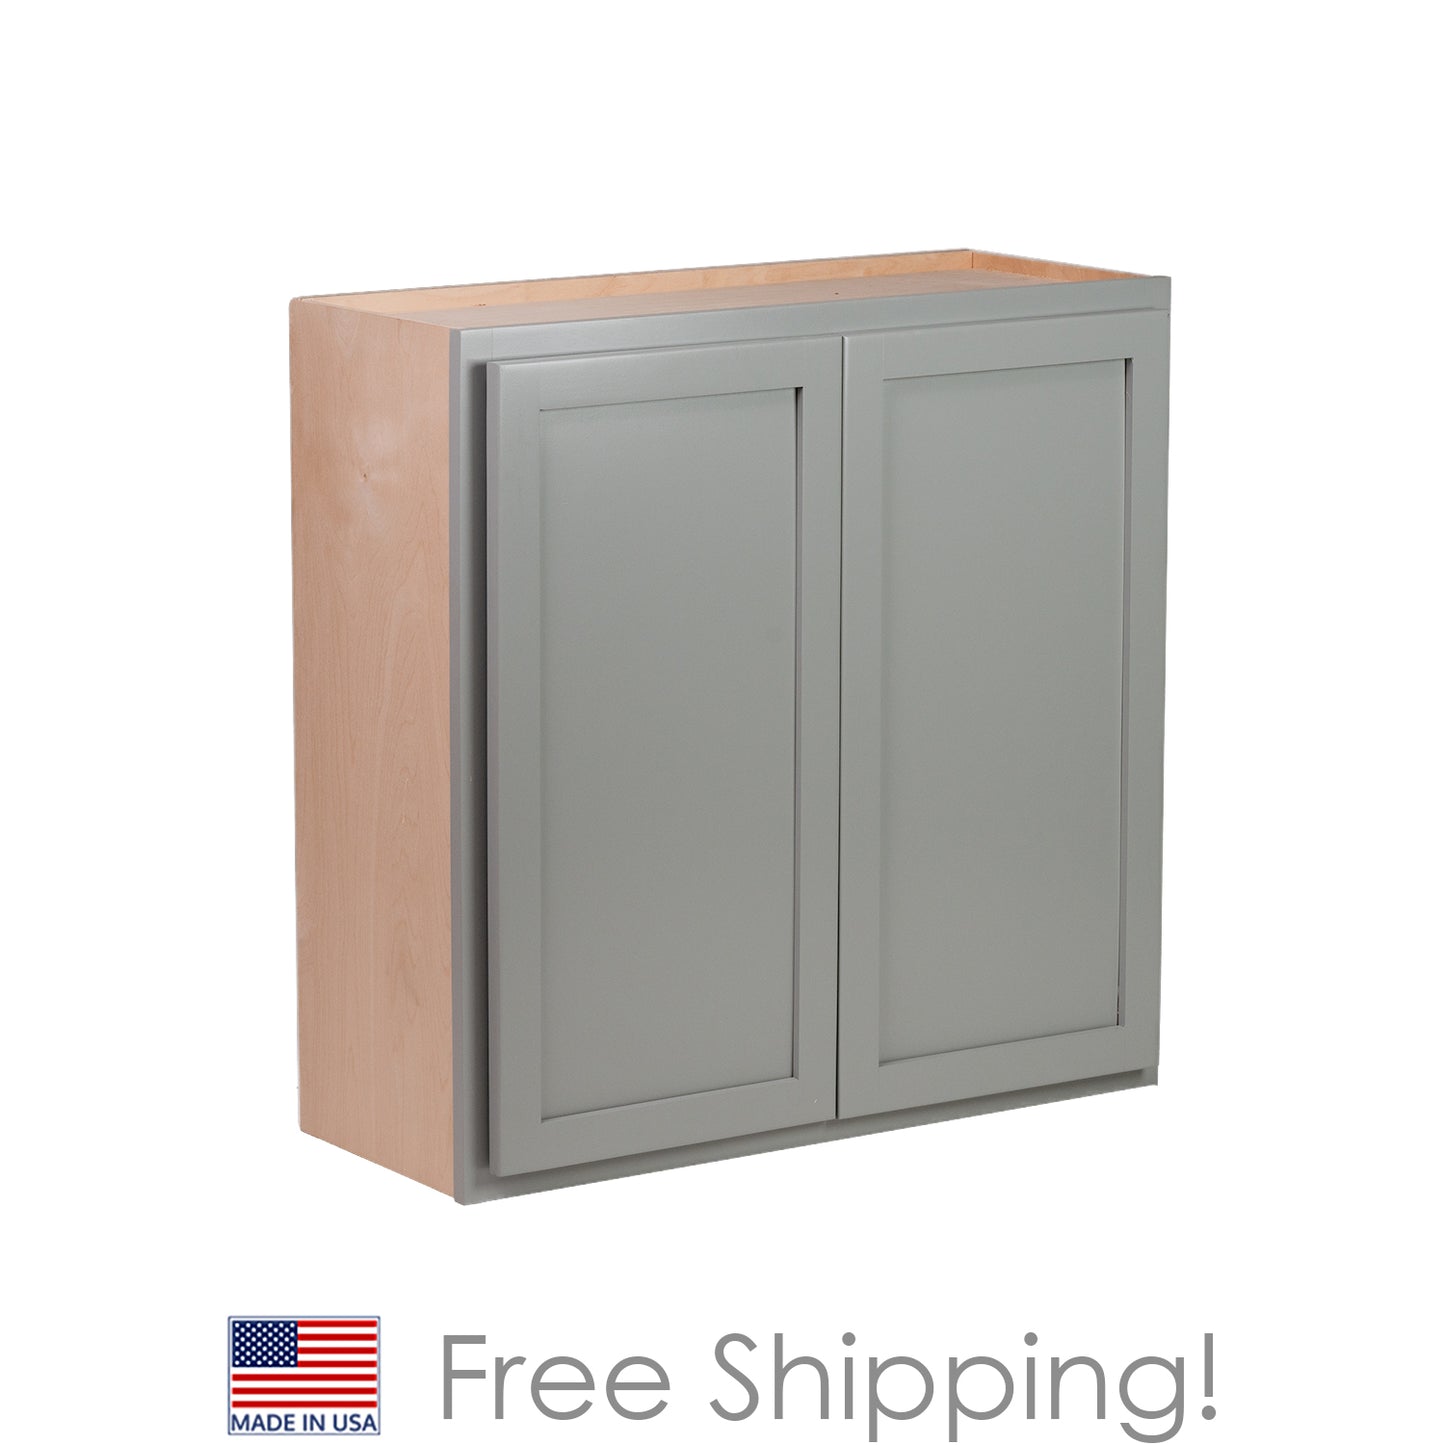 Quicklock RTA (Ready-to-Assemble) Magnetic Gray Wall Cabinet- Double Door 36"H x (30", 36"W)